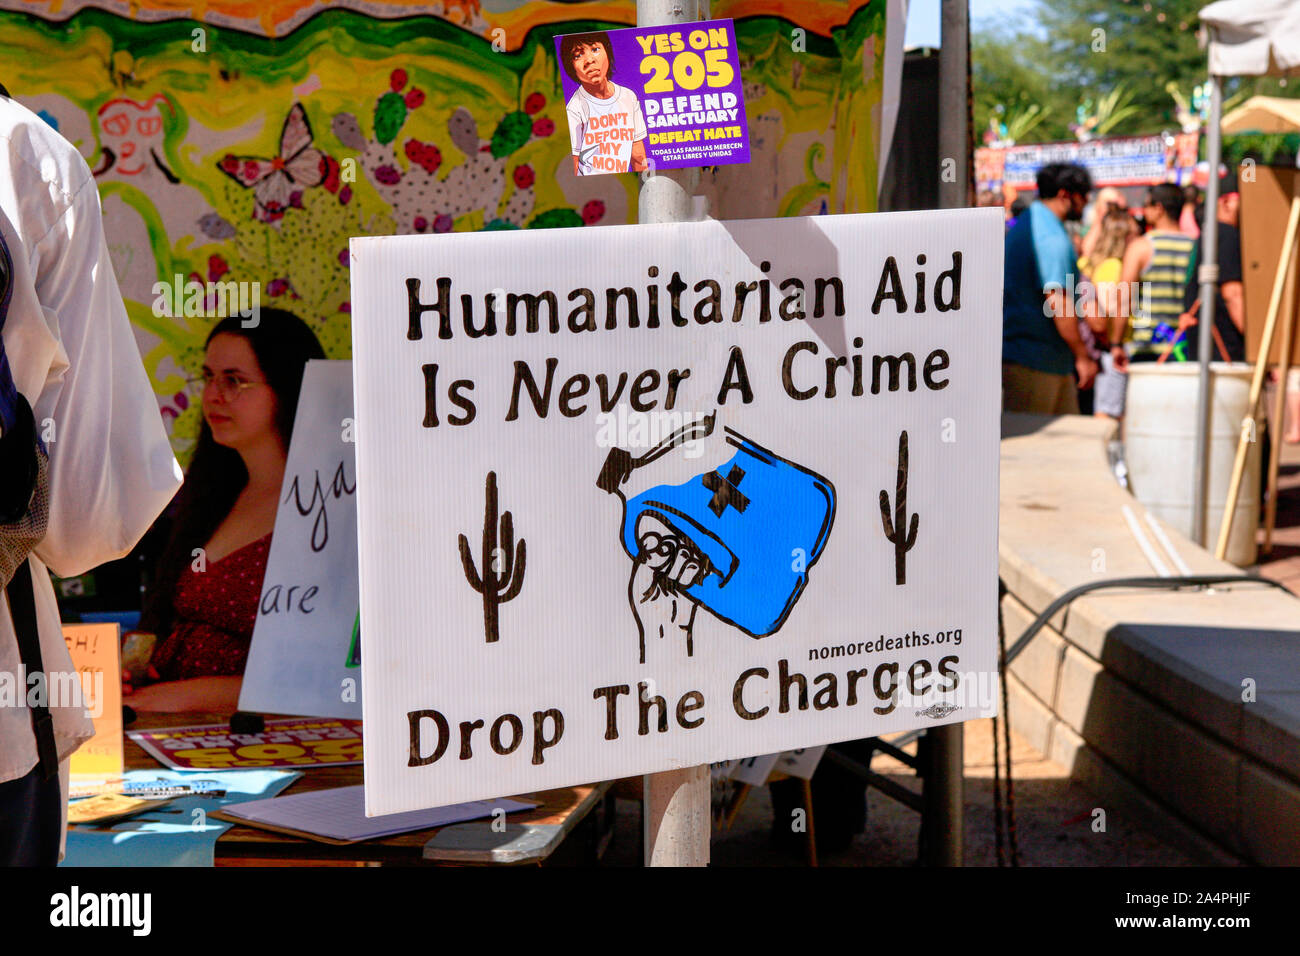 Humanitarian Aid Is Never A Crime banner and a Vote 205 in favor of Tucson becoming a sanctuary city Stock Photo